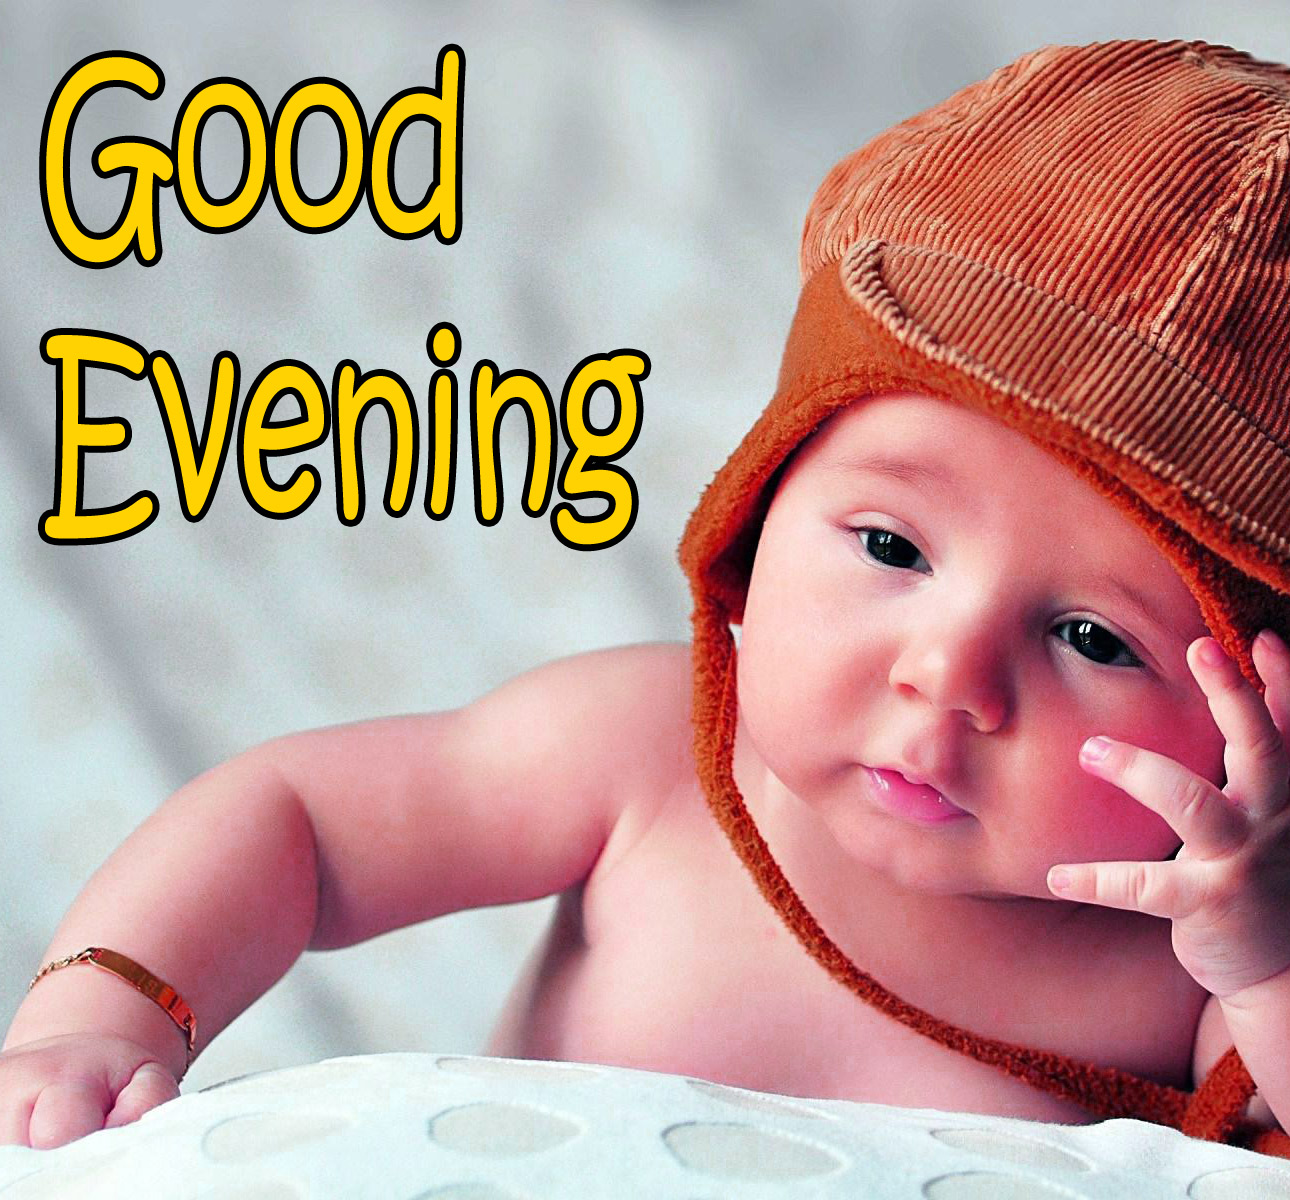 good evening images with cute baby 19